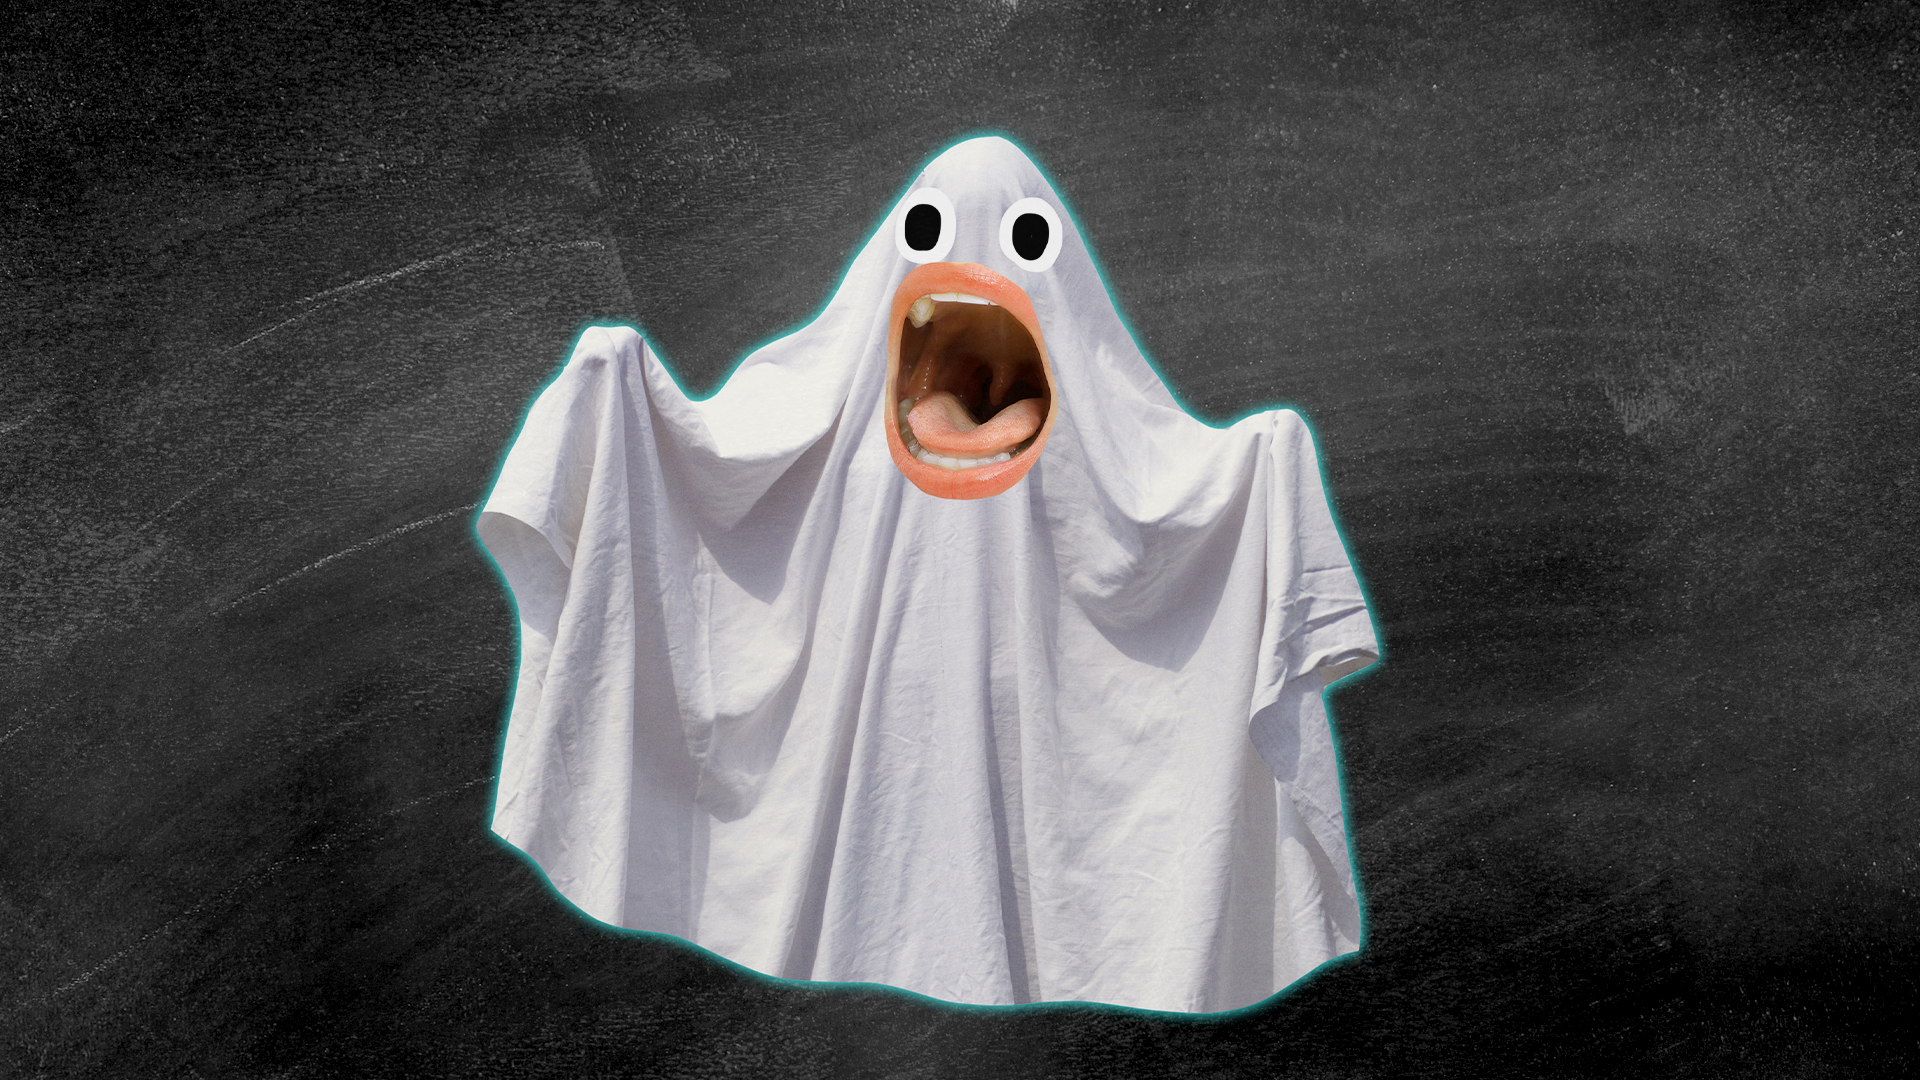 Scared looking ghost